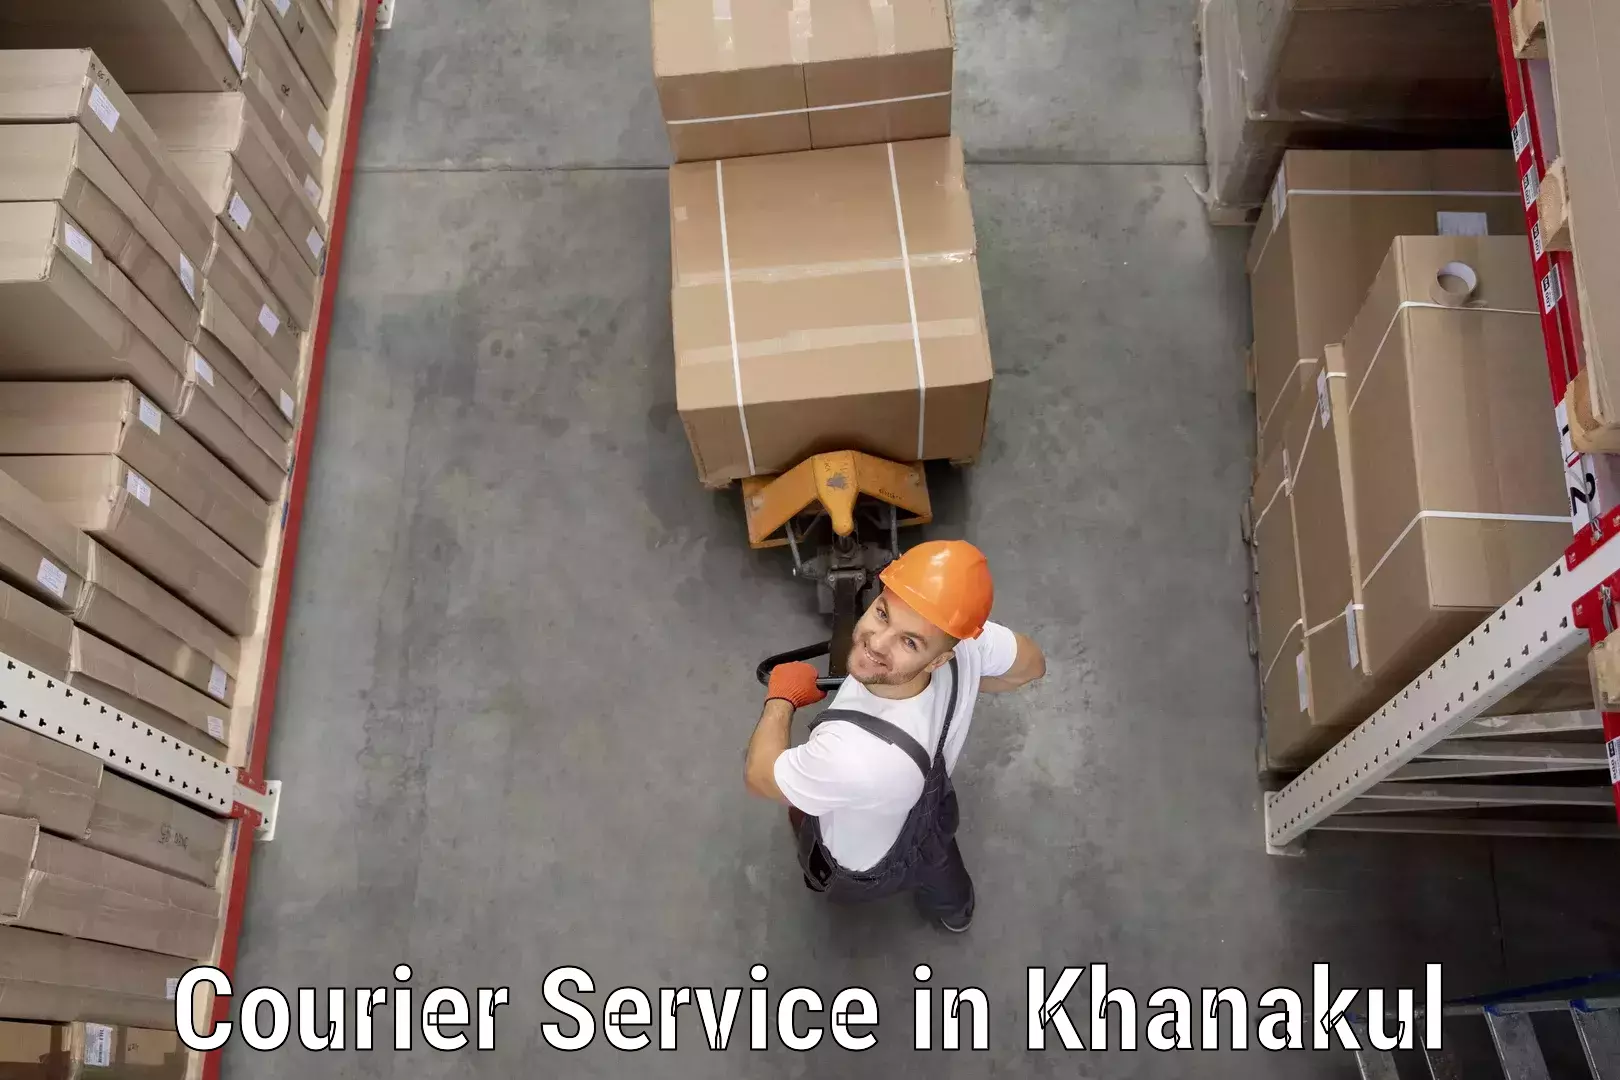 Integrated shipping services in Khanakul